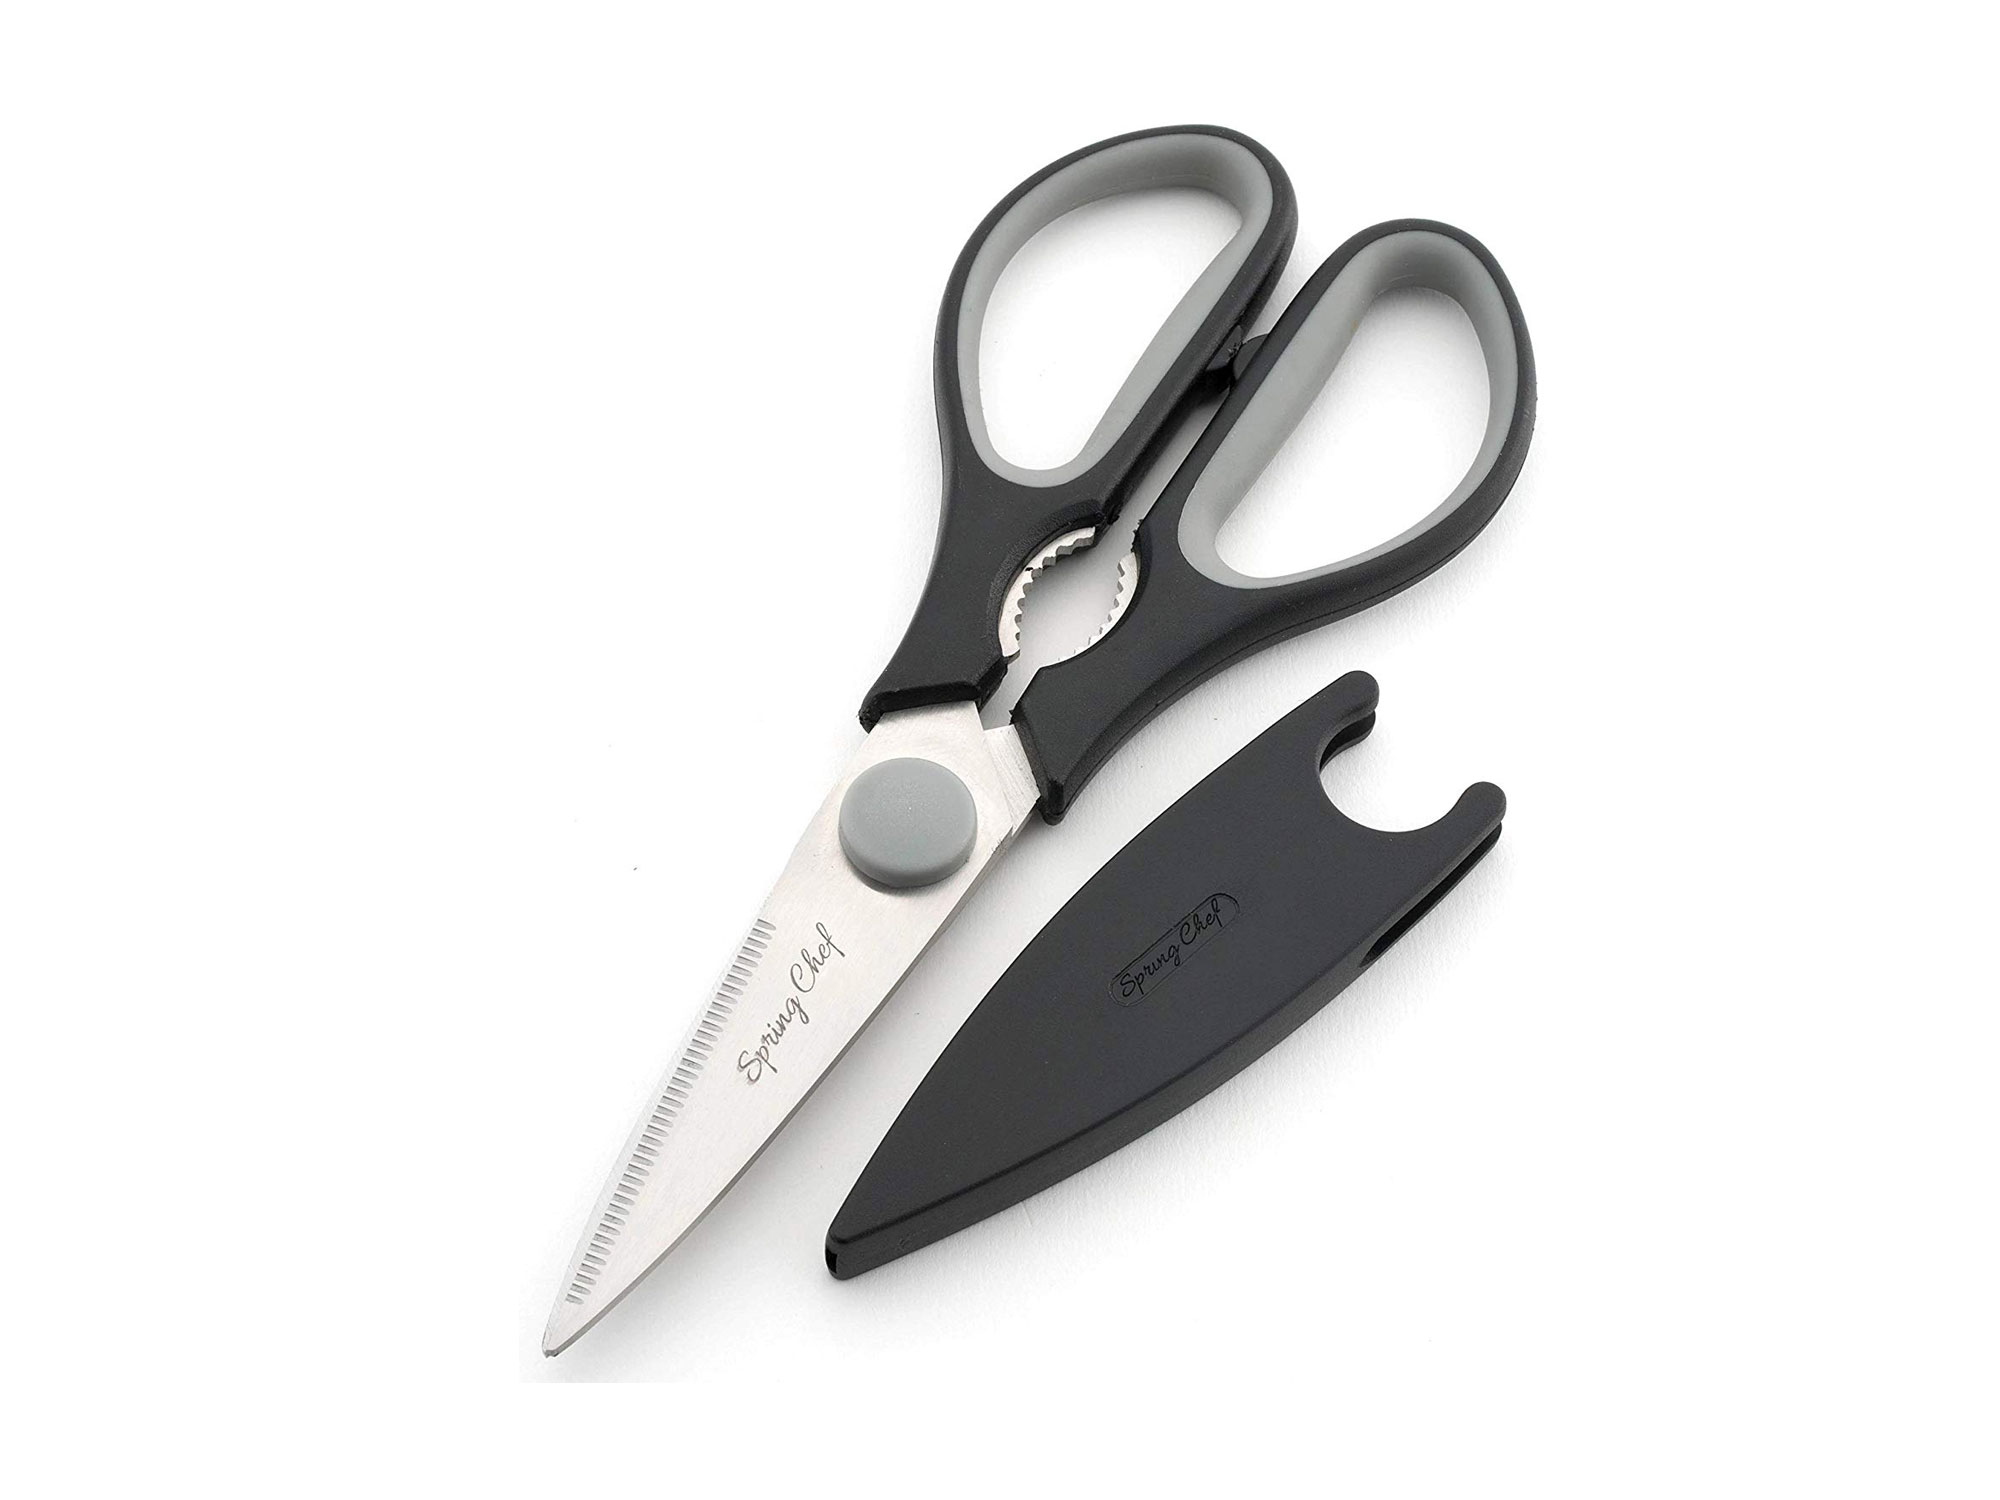 Kitchen Shears with Blade Cover